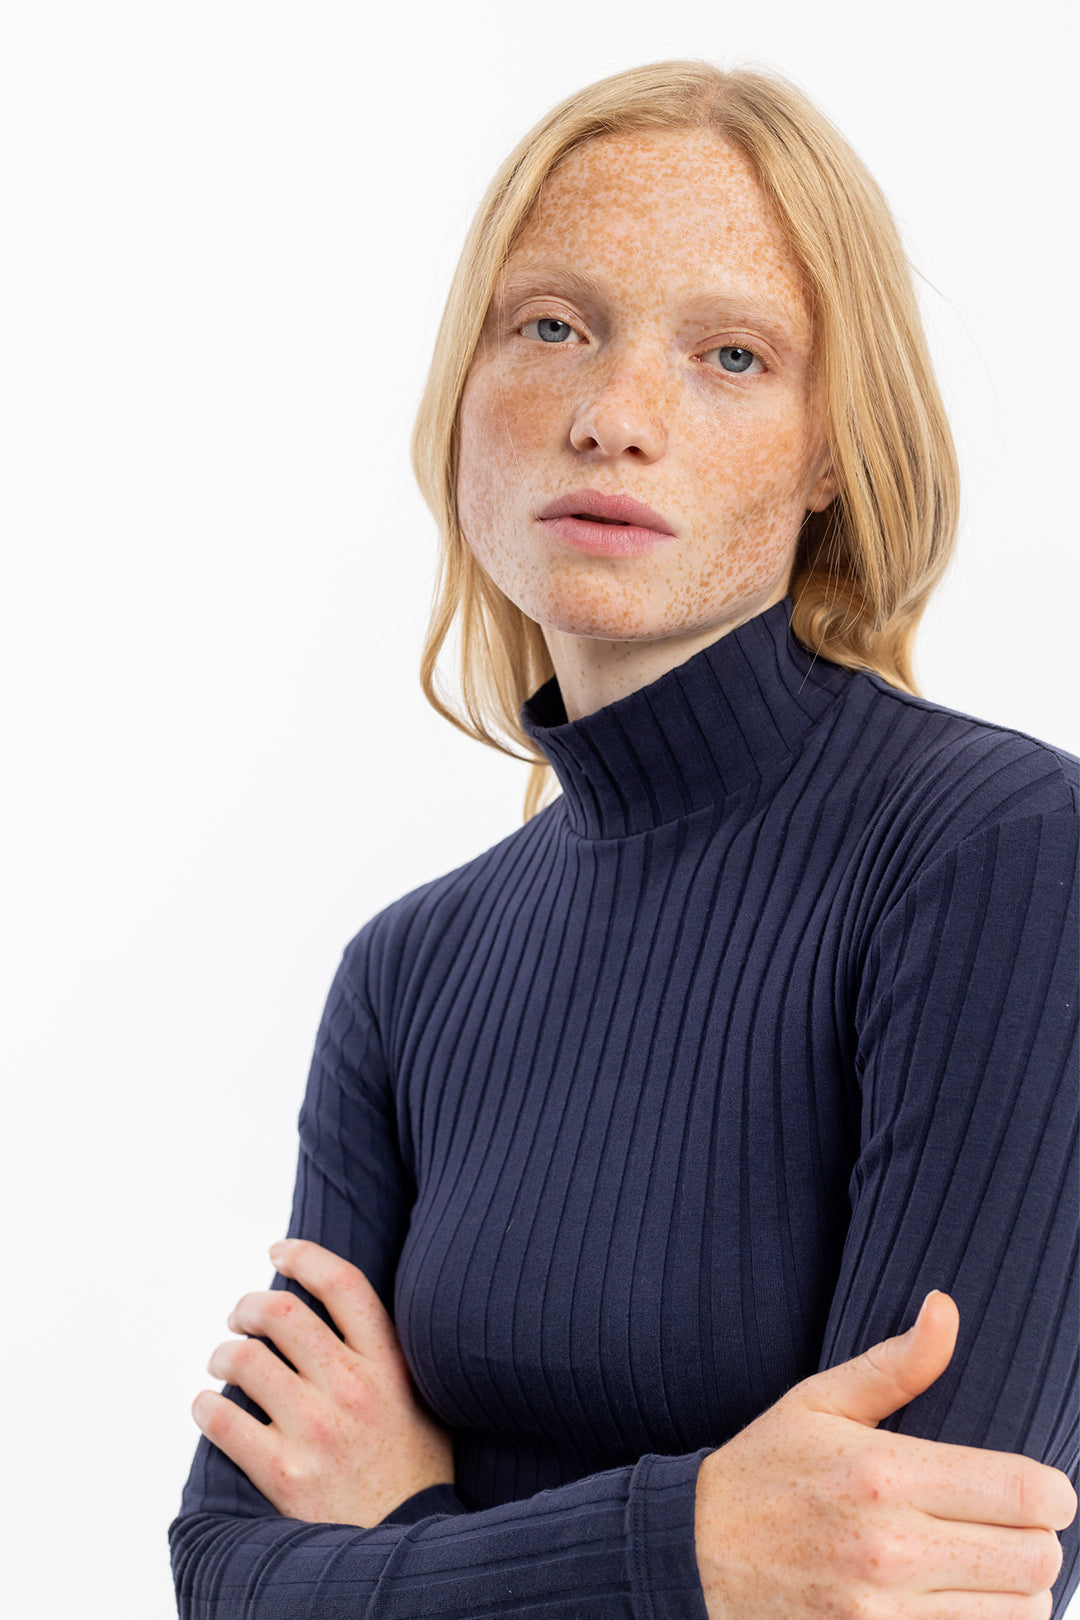 Dark blue, ribbed long-sleeved shirt made of organic cotton from Rotholz